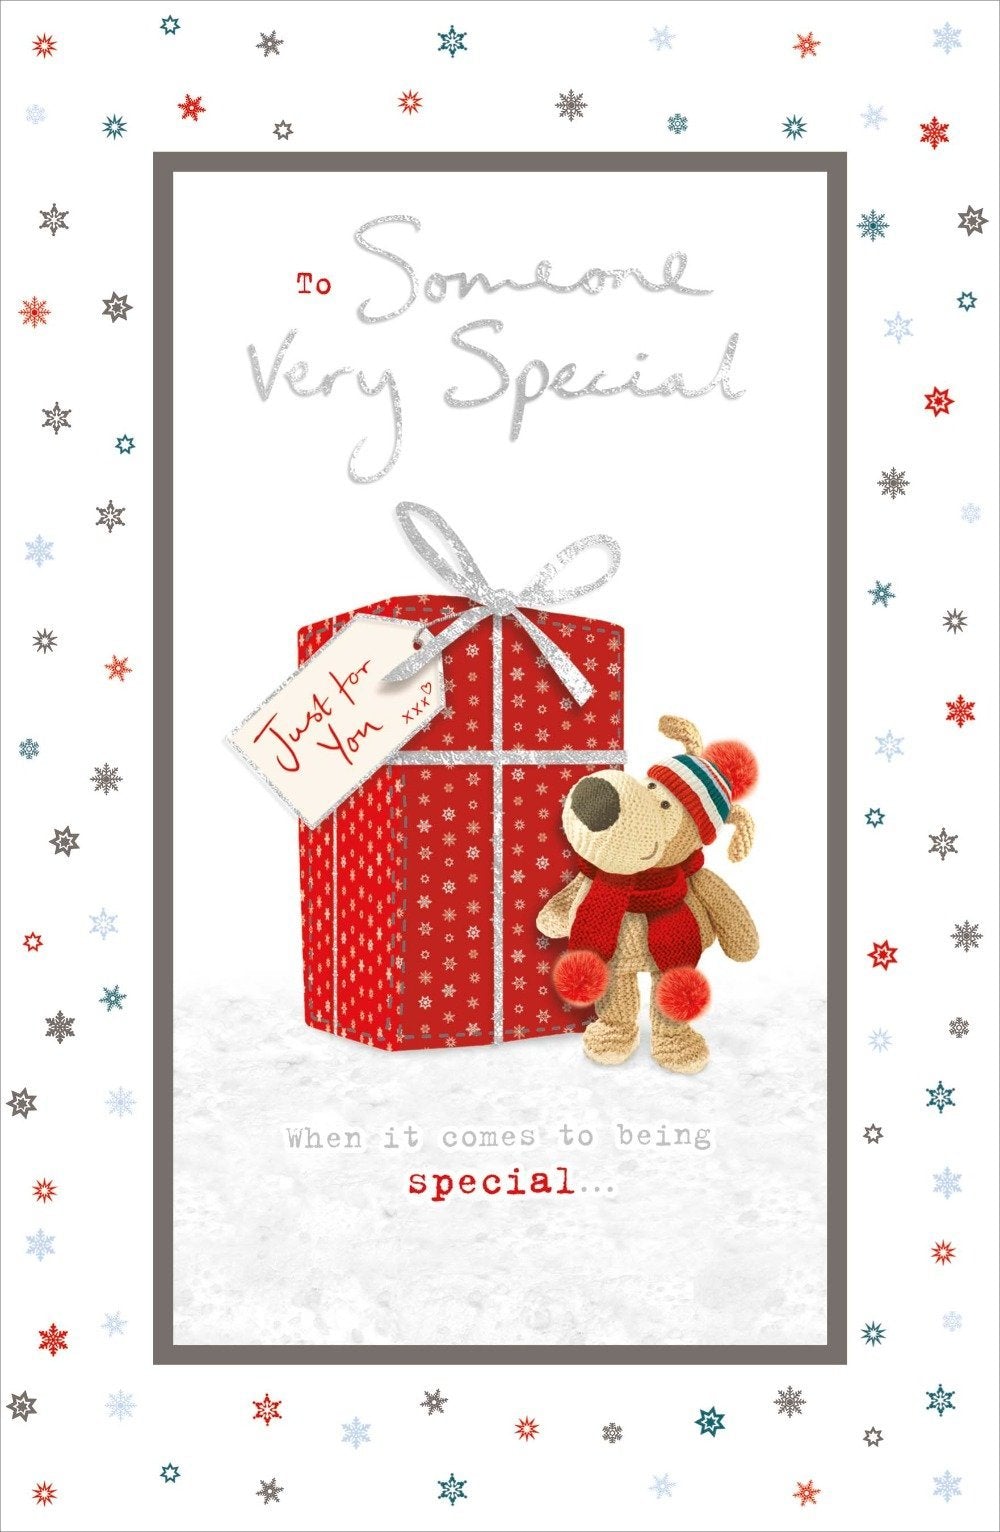 Someone Special Christmas Card